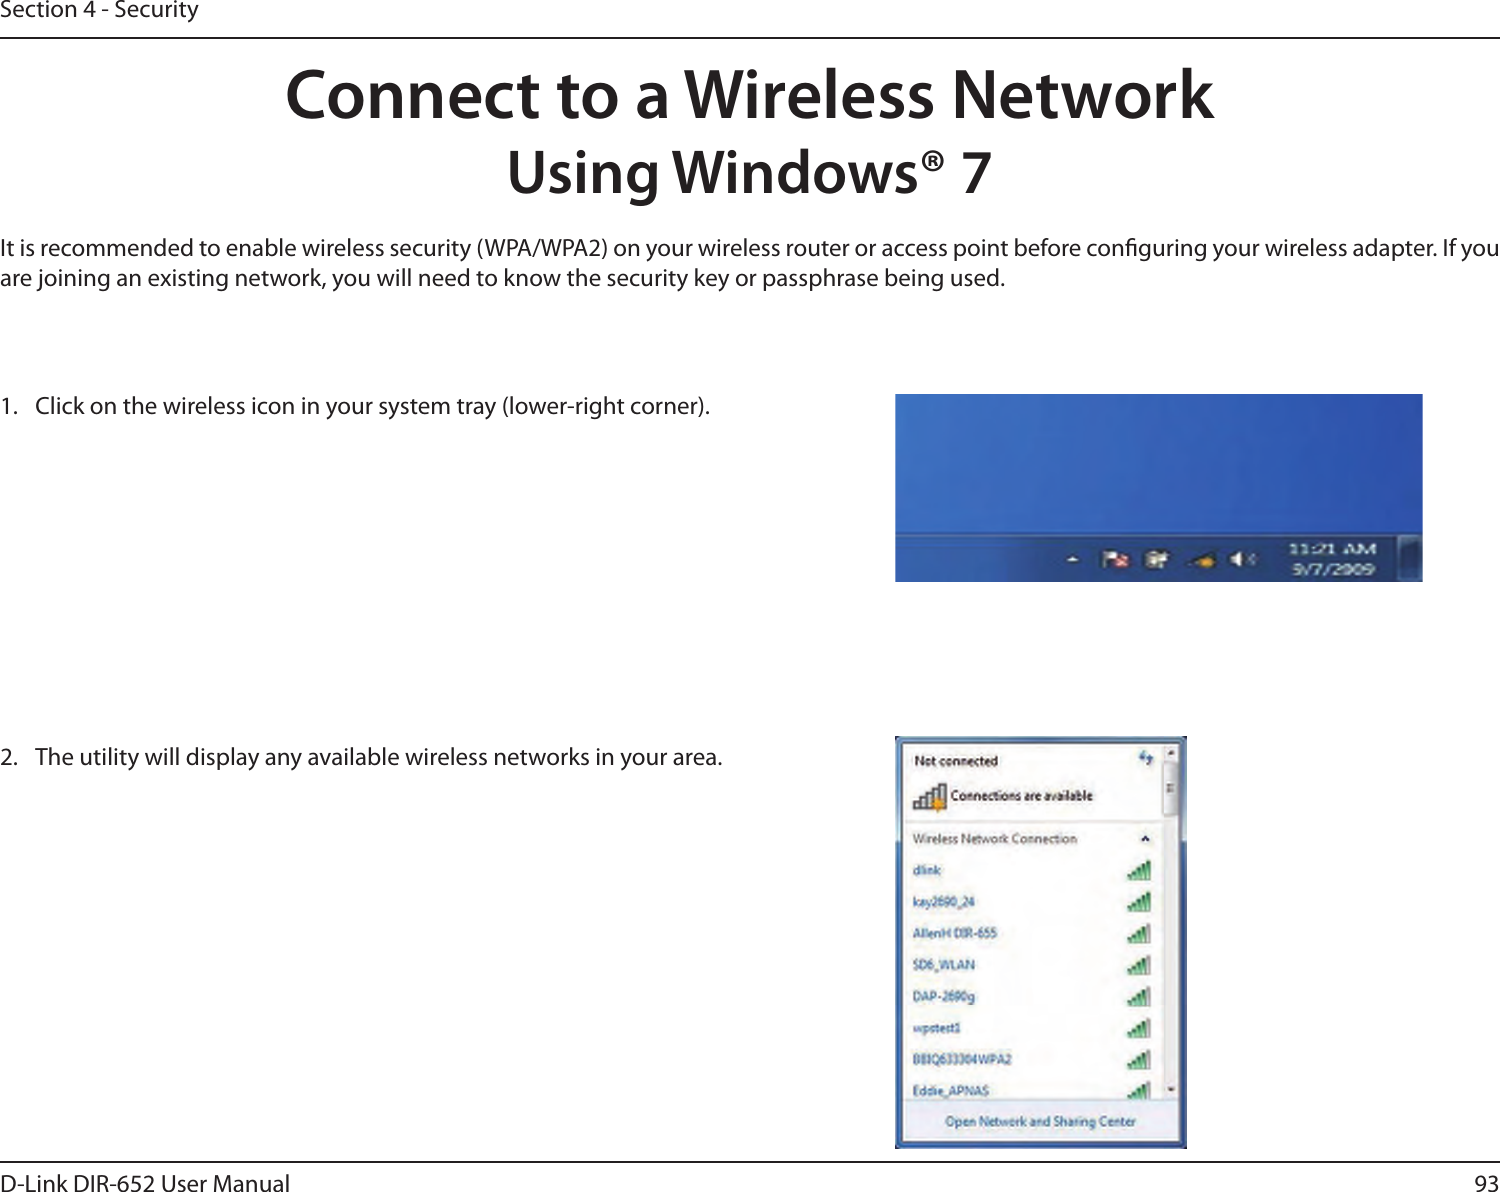 93D-Link DIR-652 User ManualSection 4 - SecurityConnect to a Wireless NetworkUsing Windows® 7It is recommended to enable wireless security (WPA/WPA2) on your wireless router or access point before conguring your wireless adapter. If you are joining an existing network, you will need to know the security key or passphrase being used.1.  Click on the wireless icon in your system tray (lower-right corner).2.  The utility will display any available wireless networks in your area.